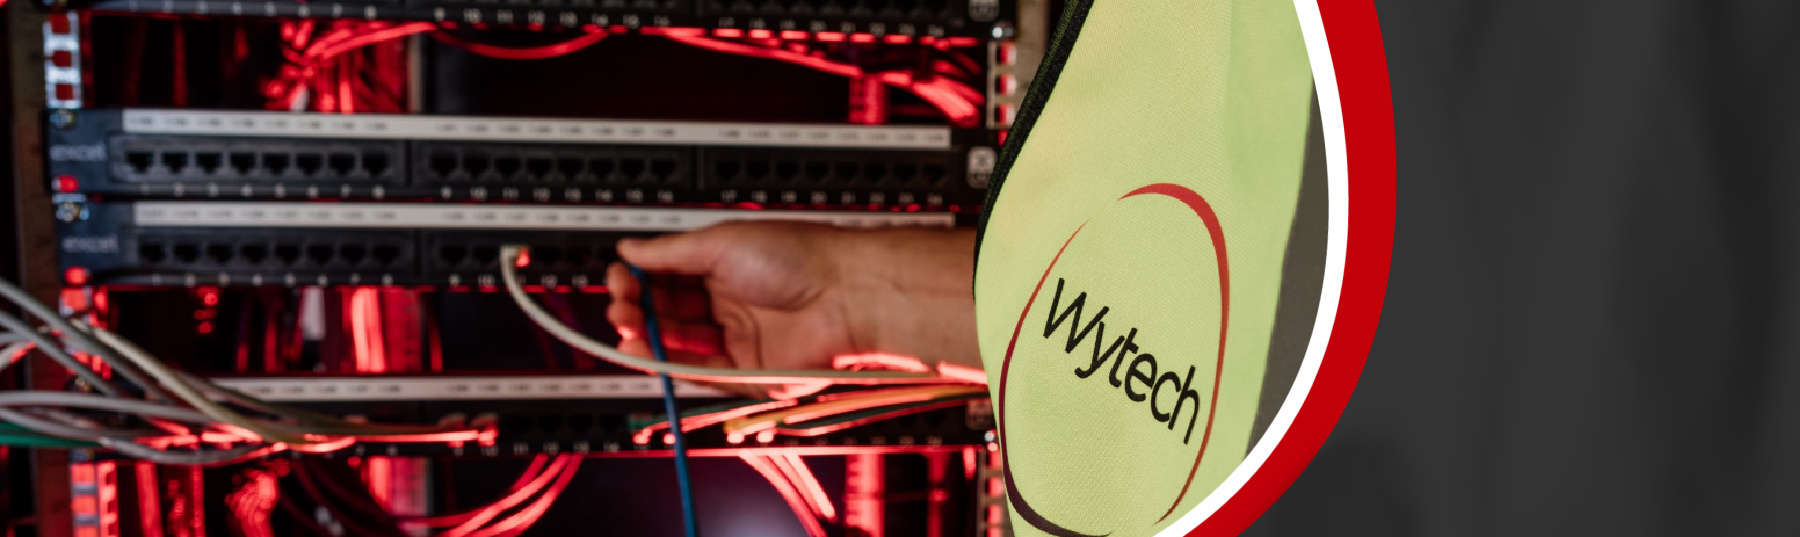 Wytech named Midlands’ top IT Services Provider